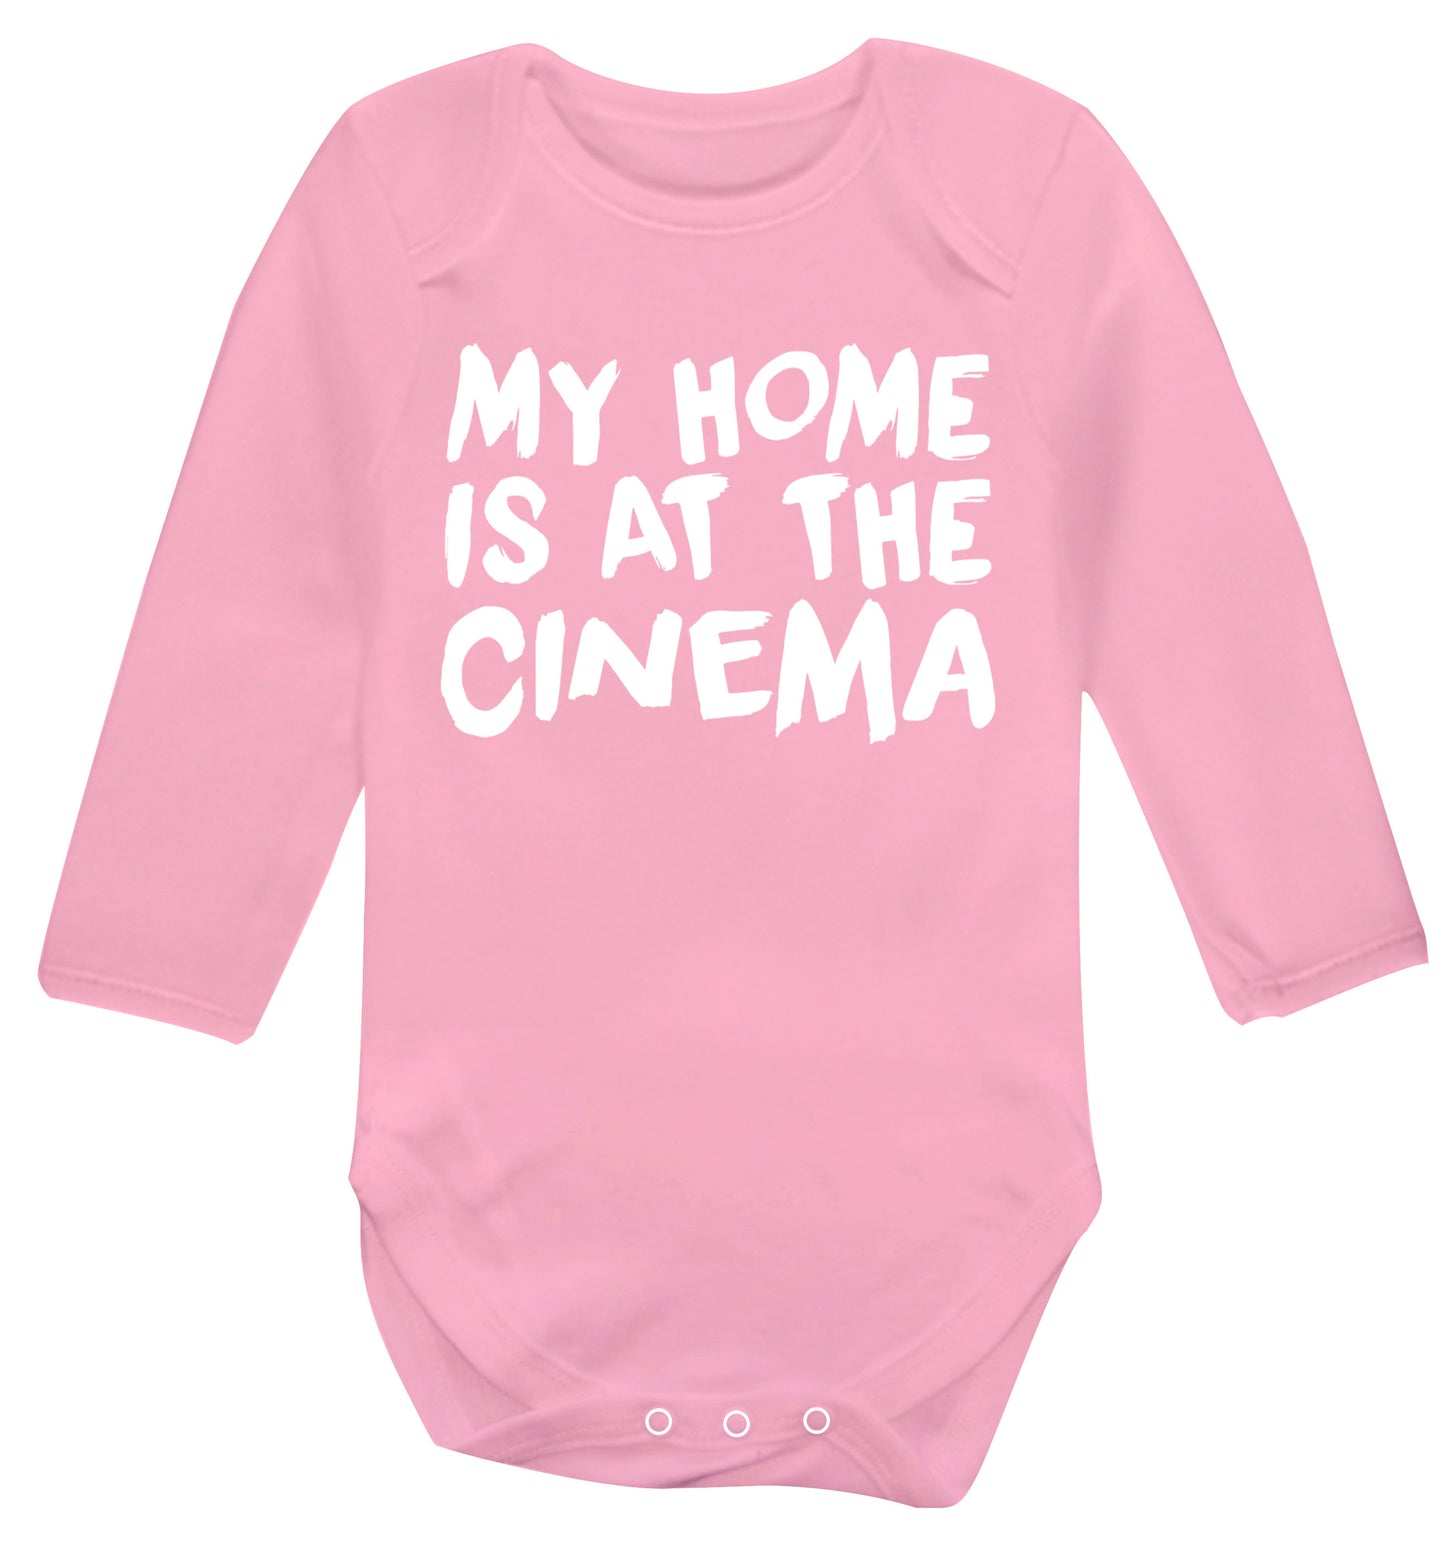 My home is at the cinema Baby Vest long sleeved pale pink 6-12 months